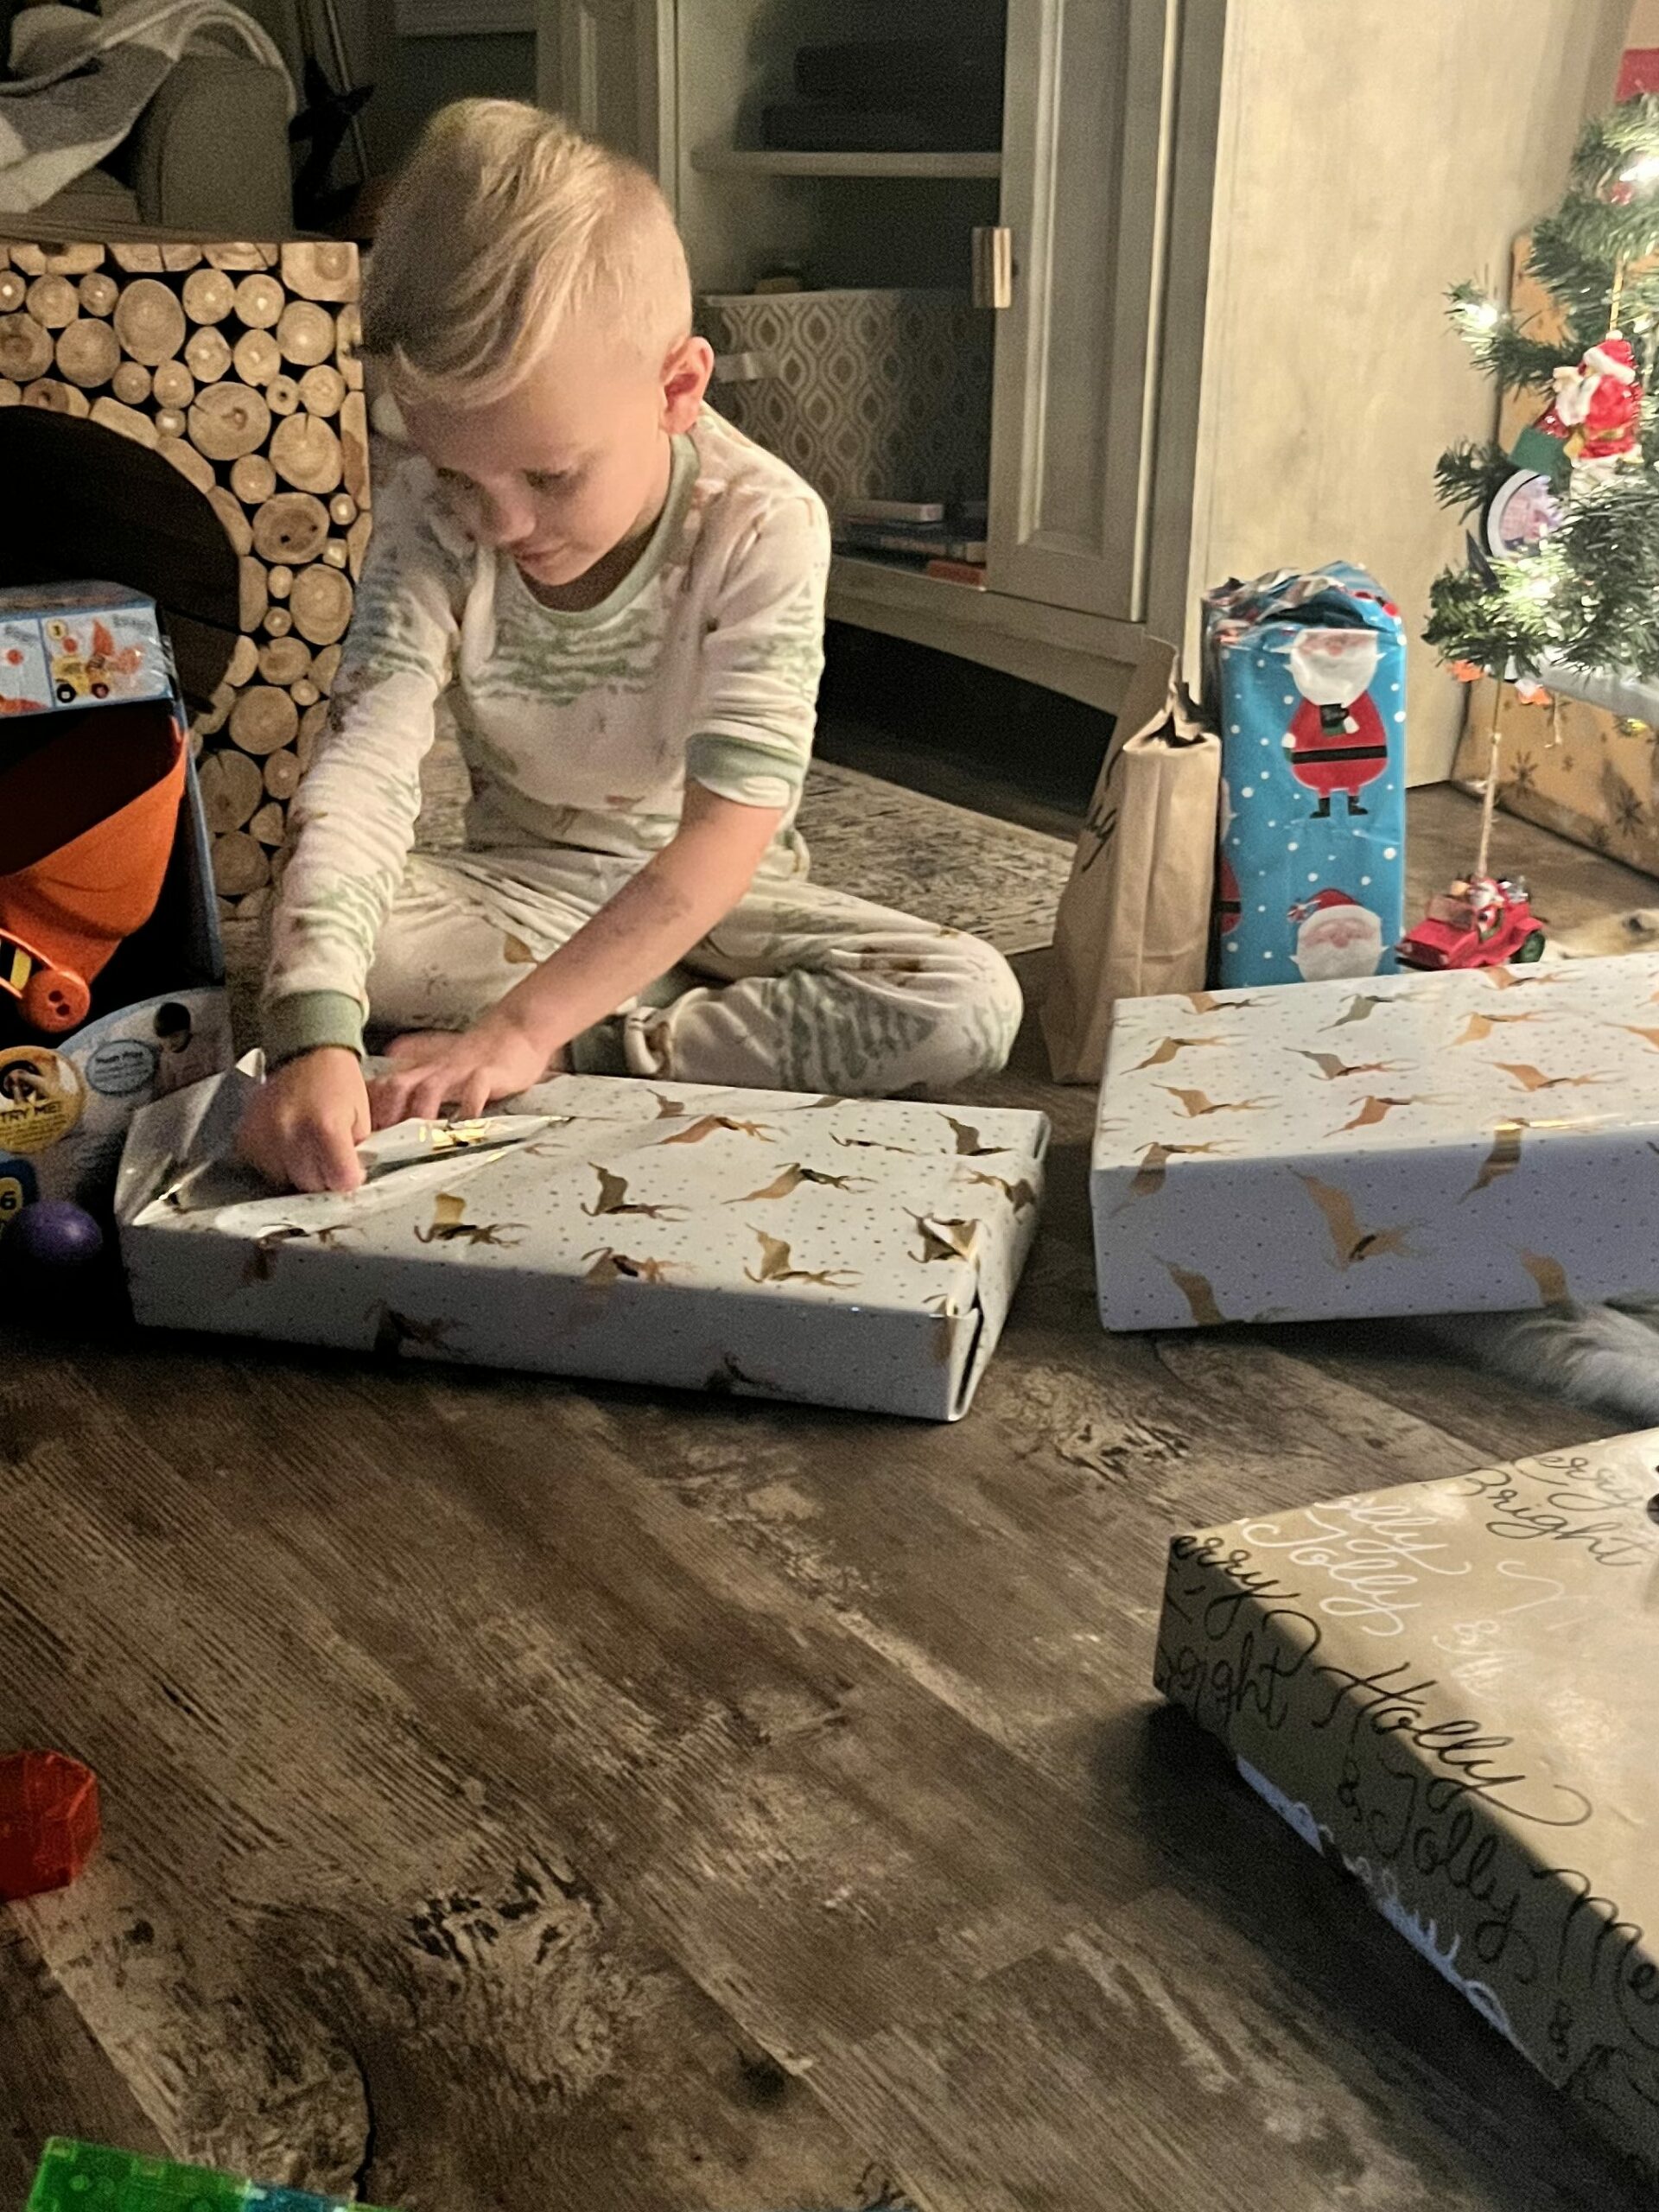 Sage opening presents on Christmas Day 2021